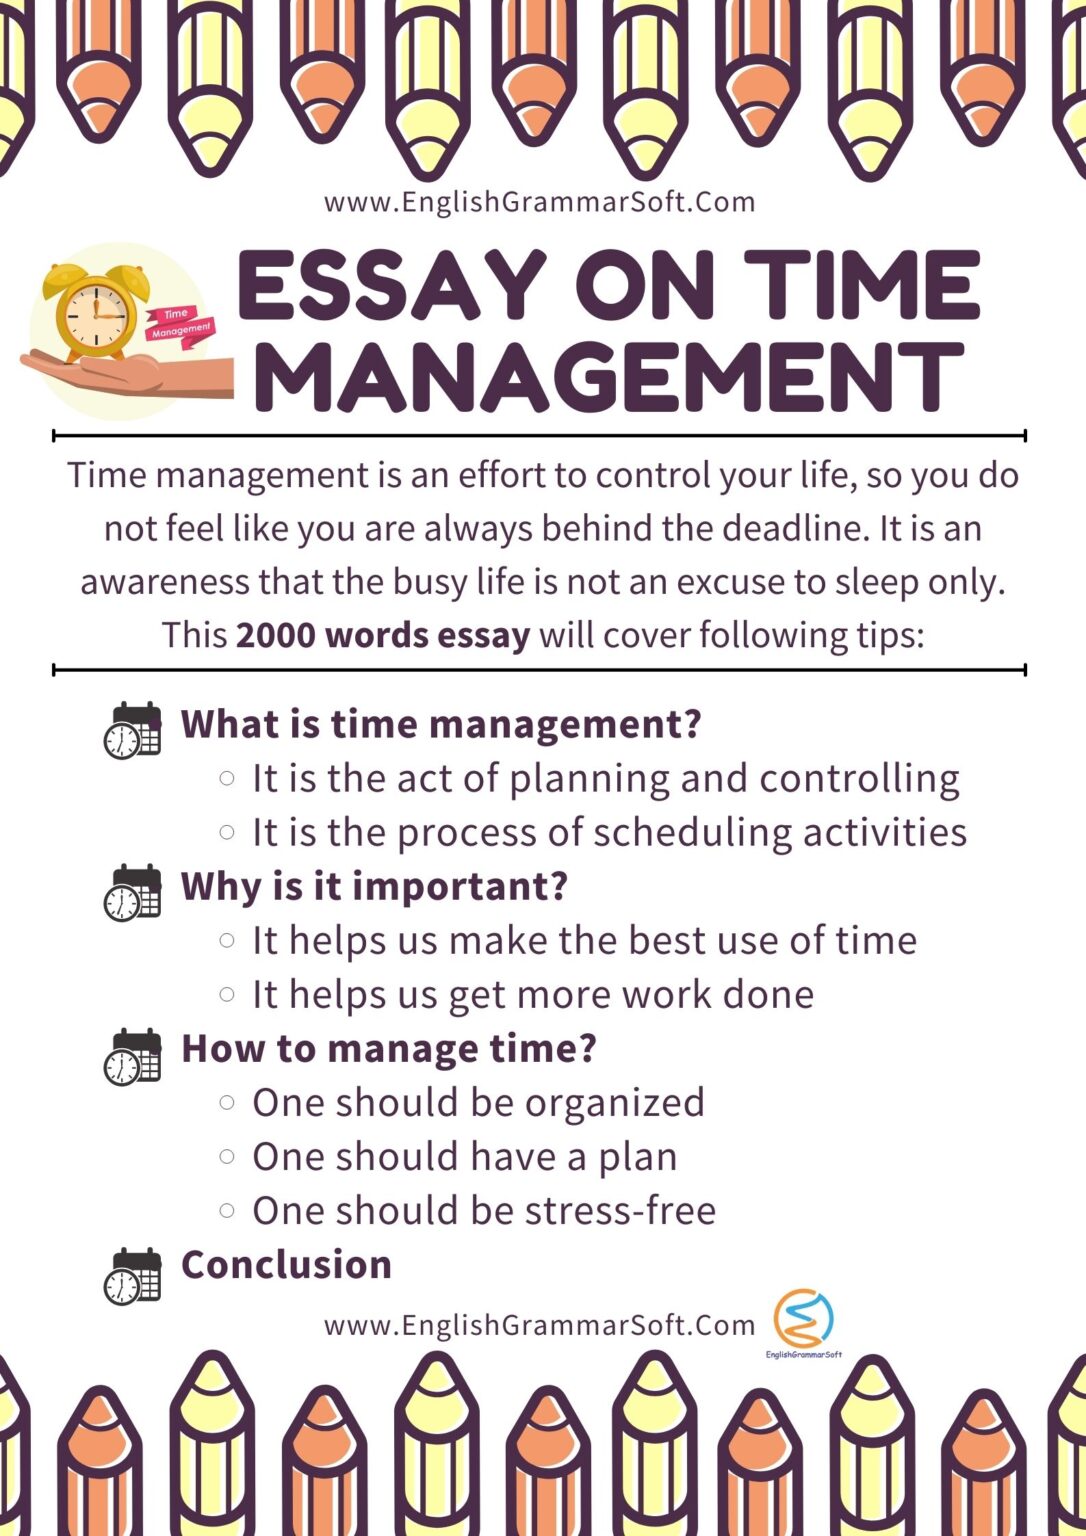 is time management important essay